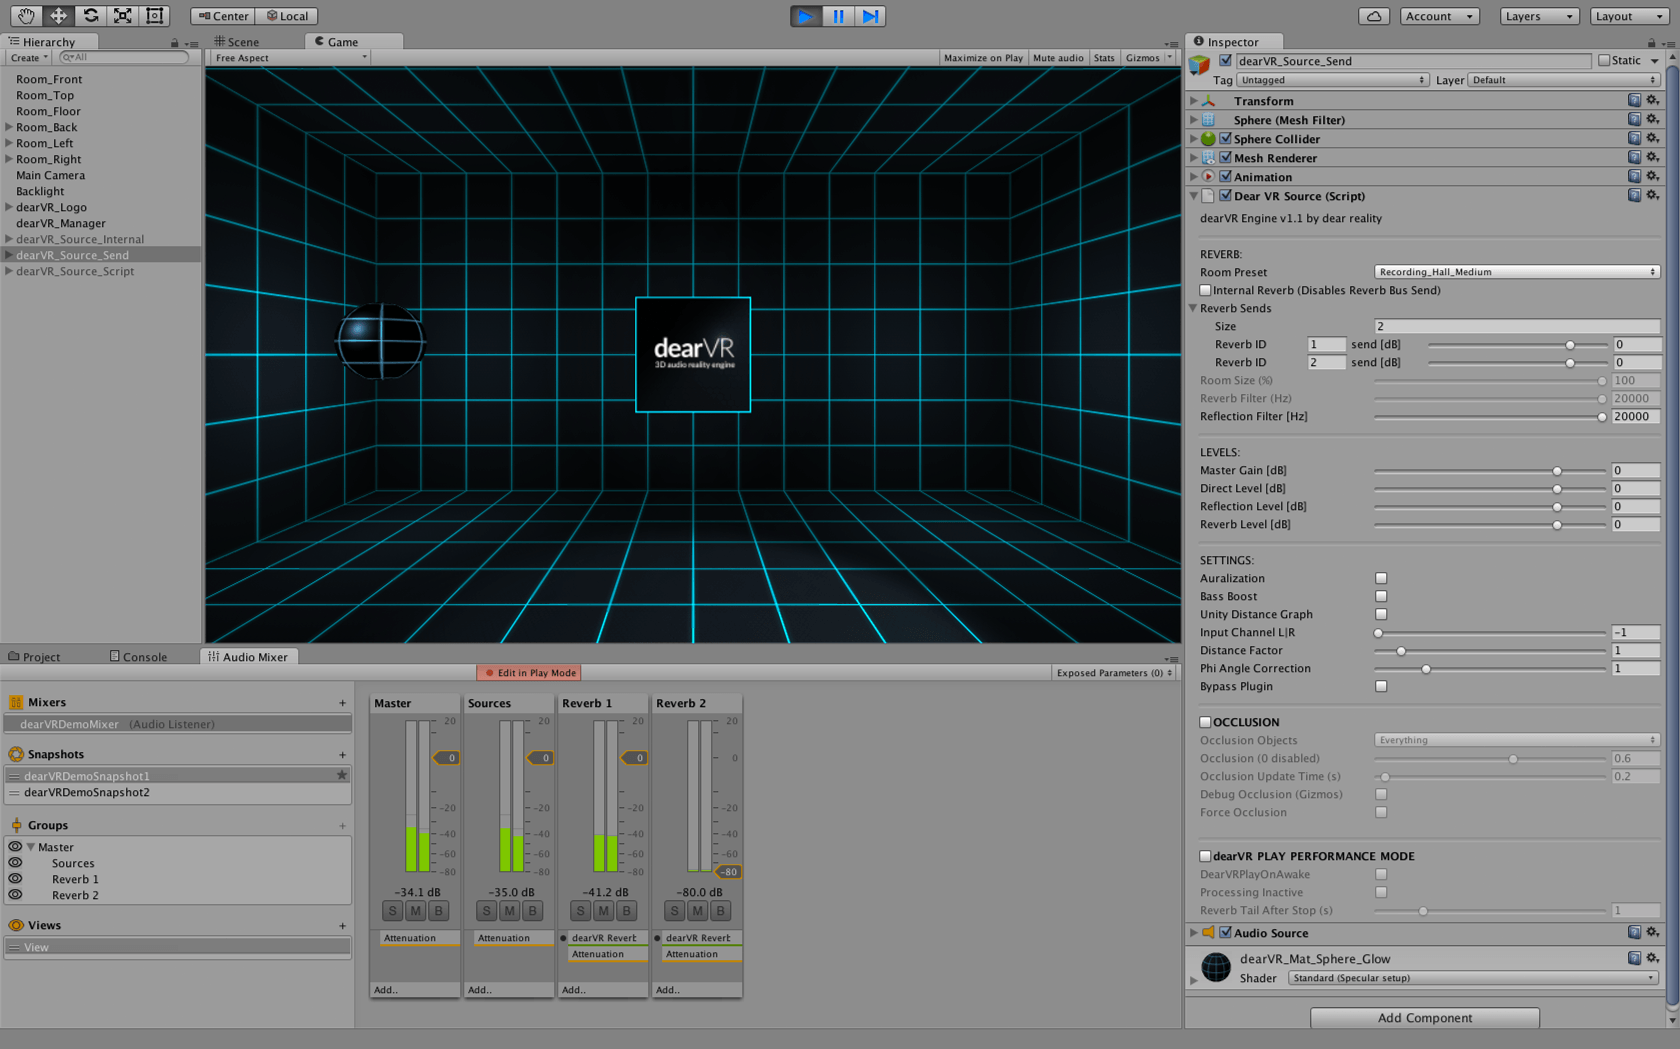 The dearVR audio engine interface for Unity.